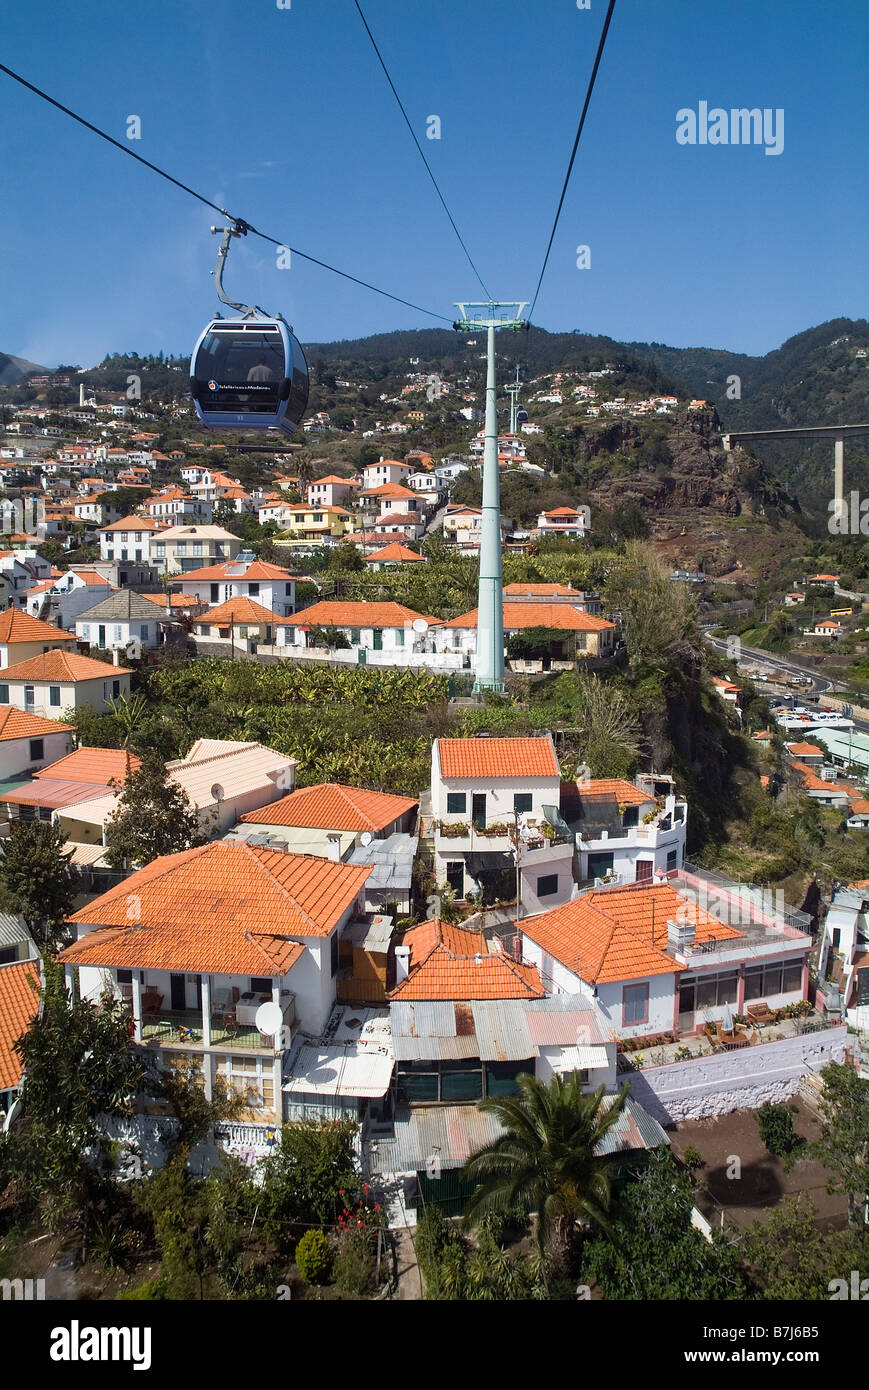 dh Cable car pod FUNCHAL MADEIRA Above houses roofs cablecar gondola high vista view from lift Stock Photo